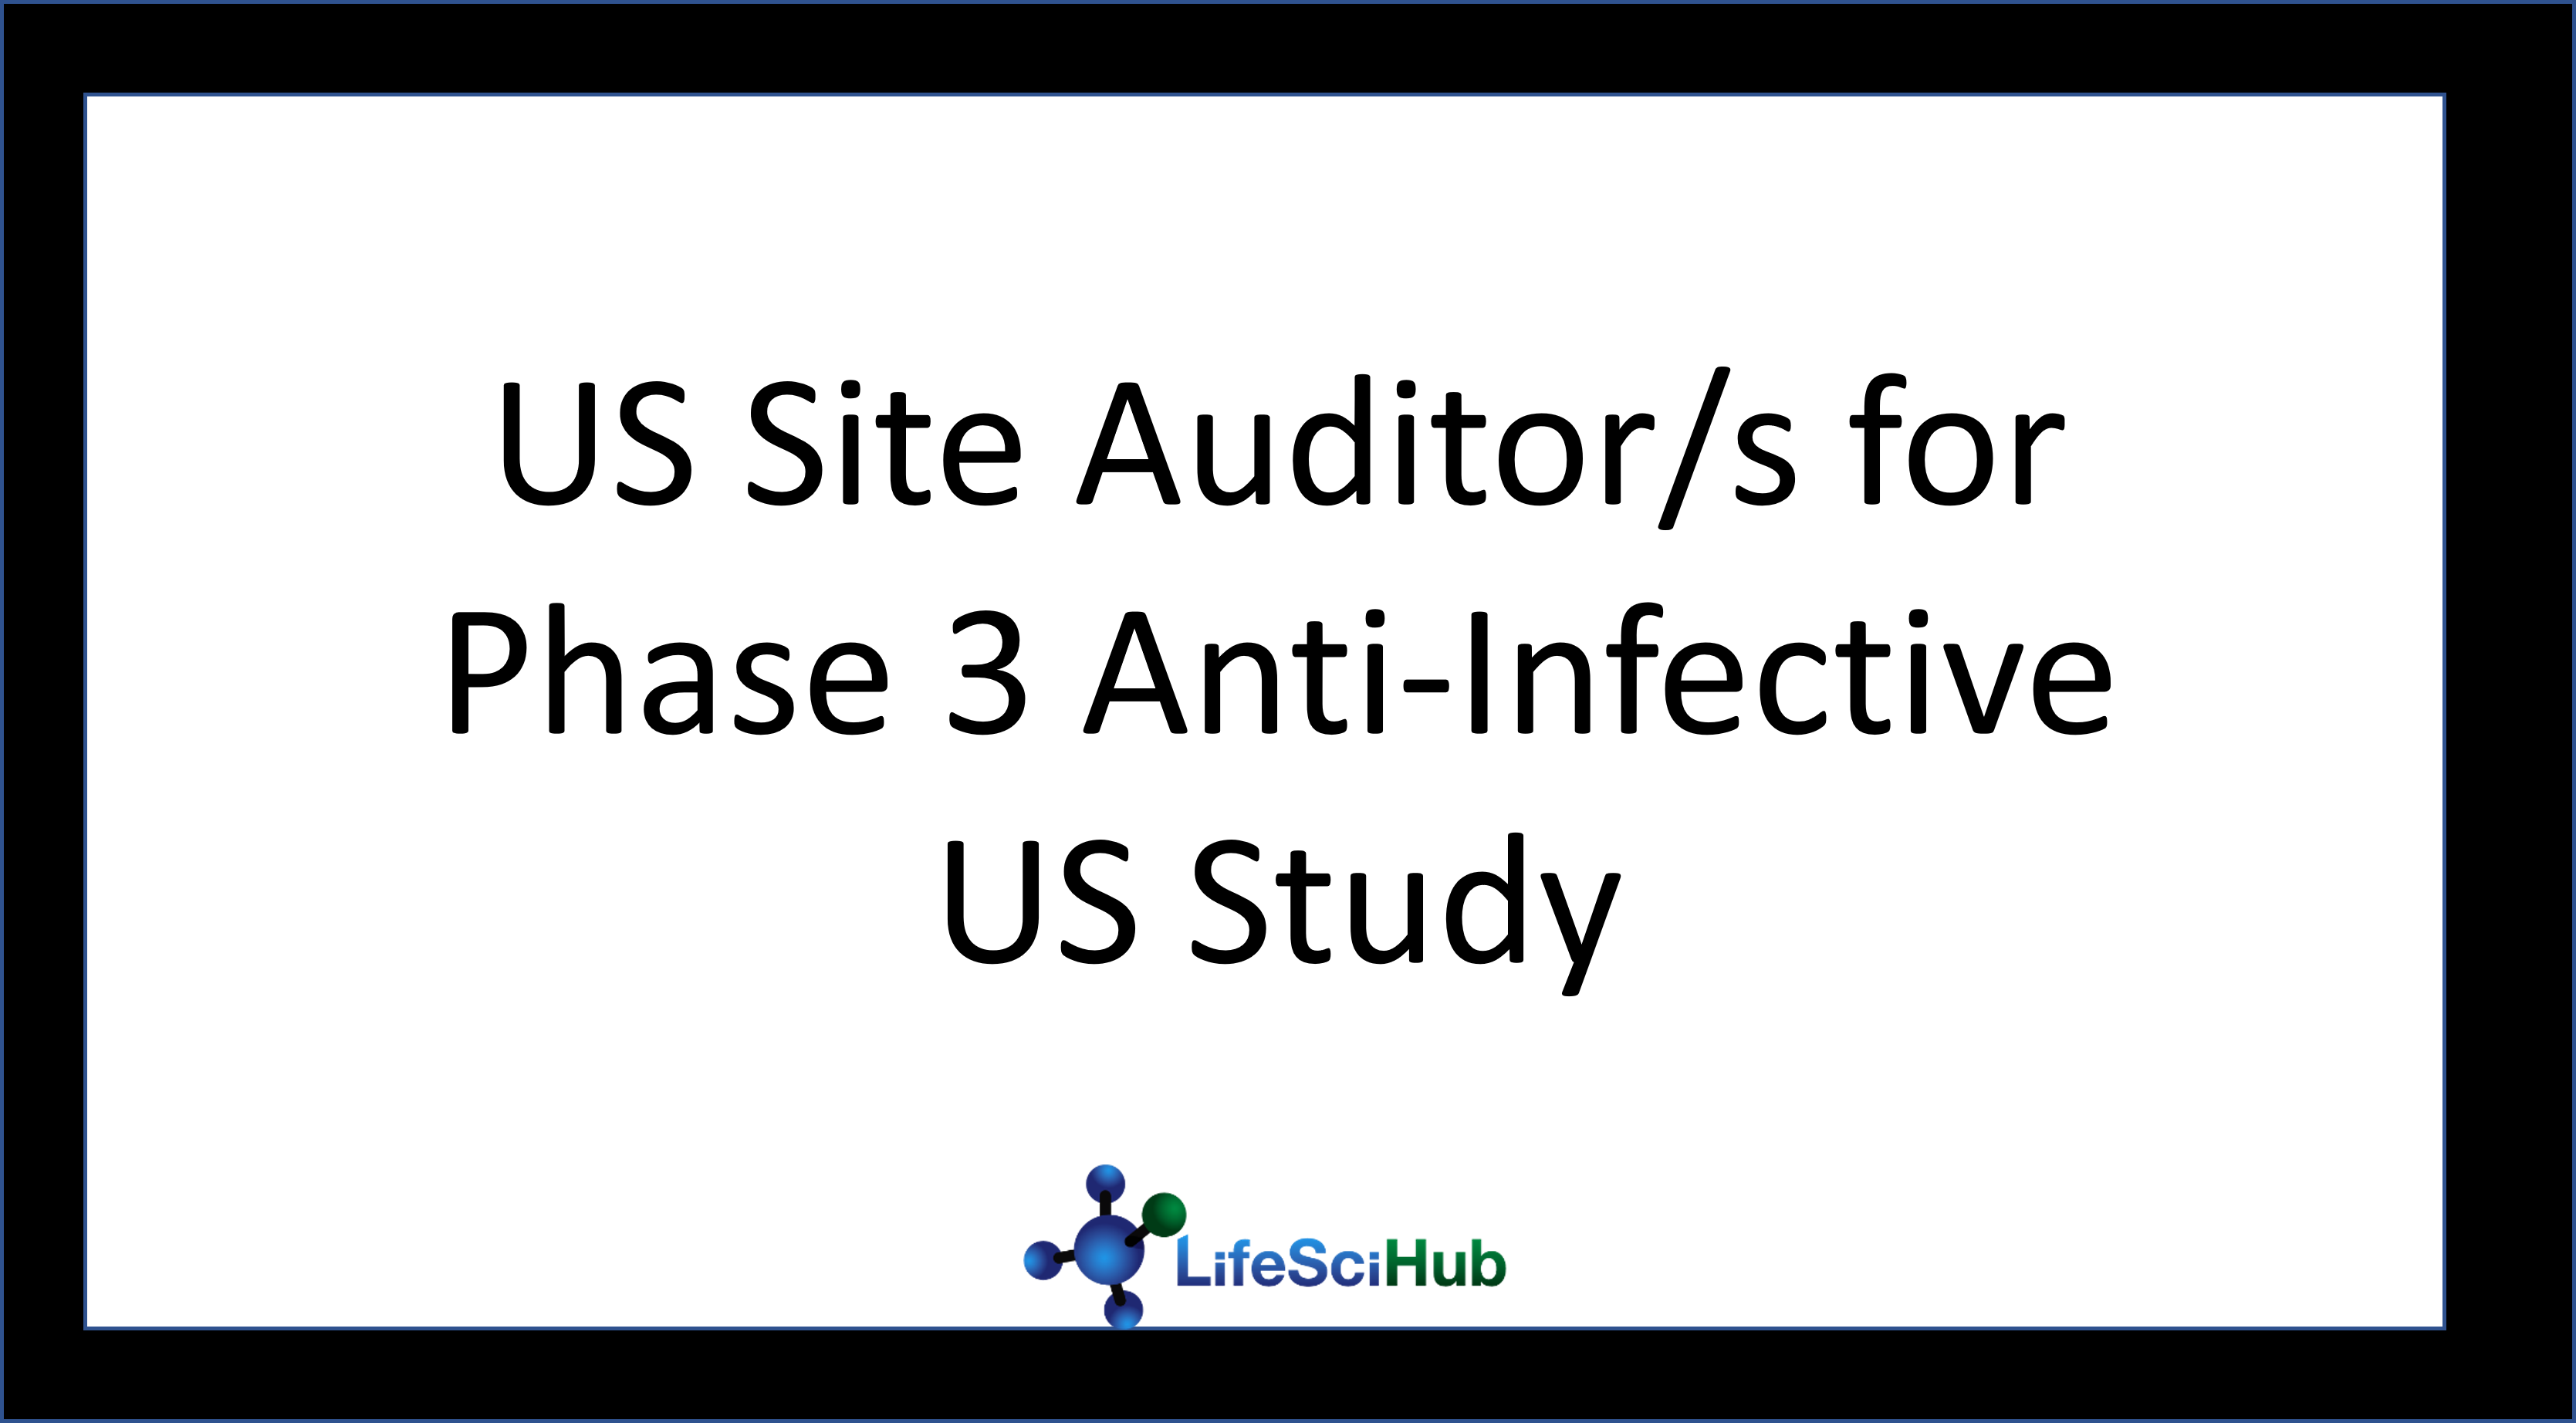 US Site Auditor/s for Phase 3 Anti-Infective US Study